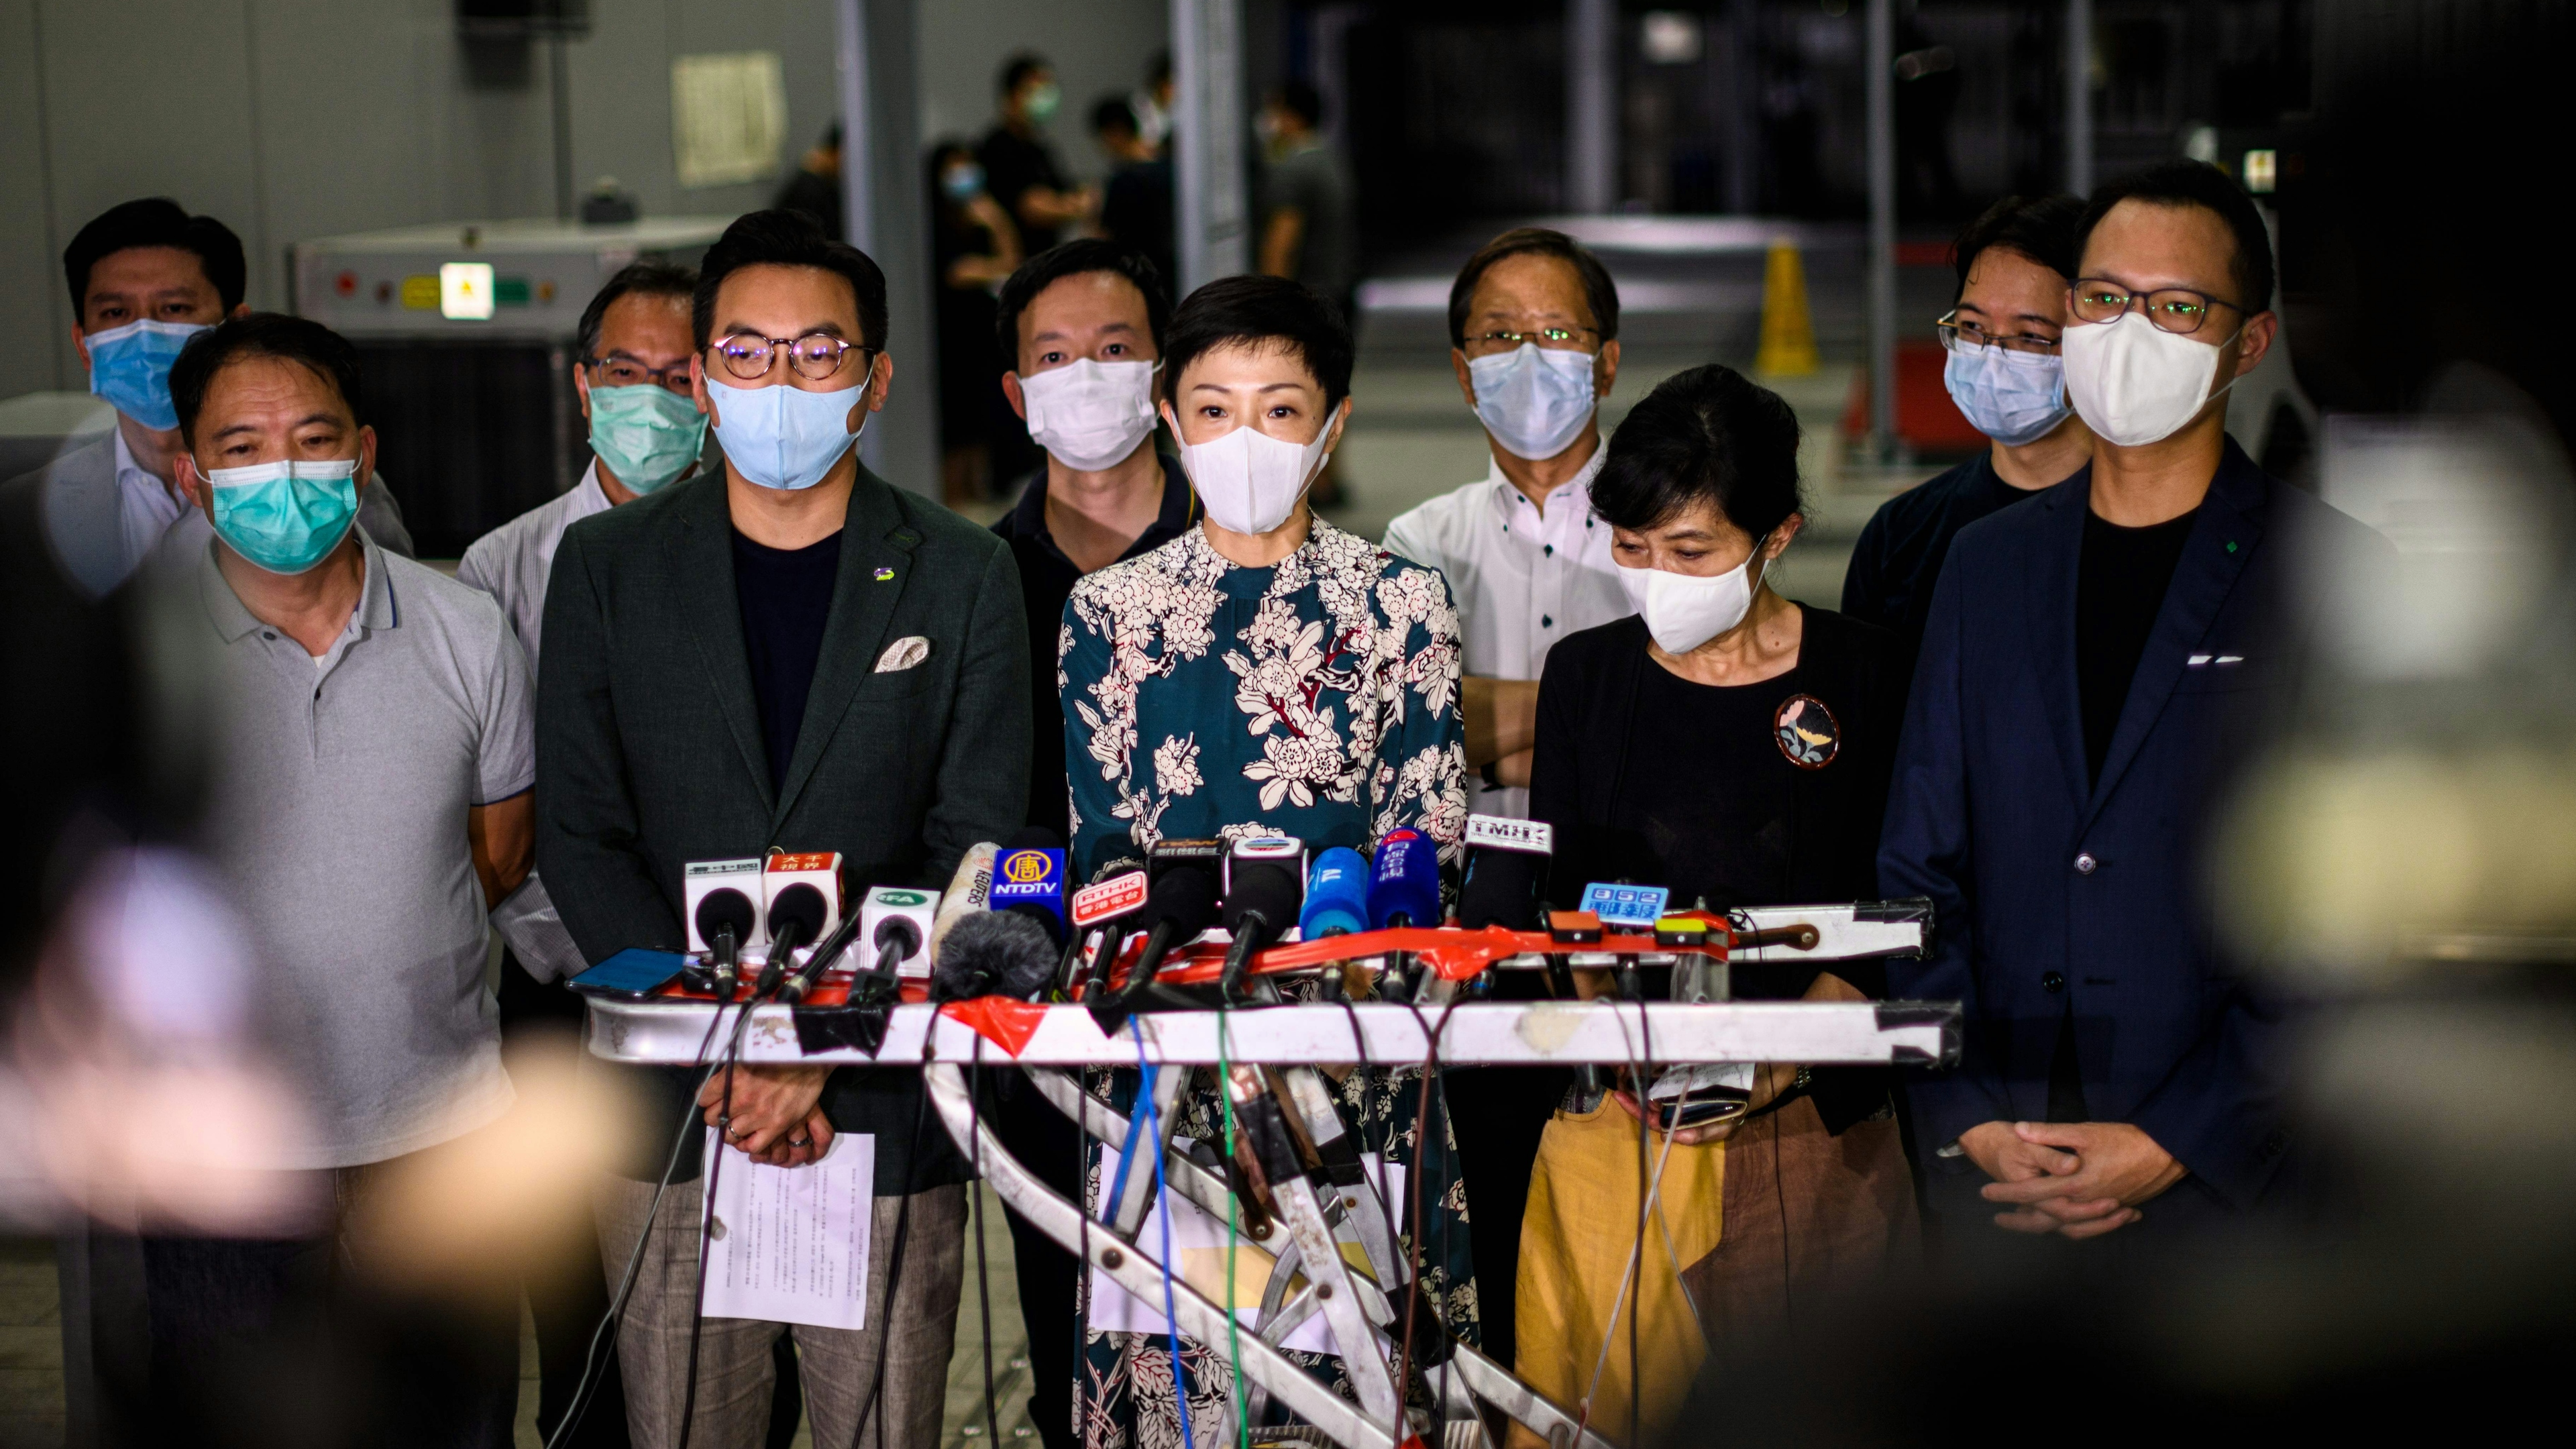 Pro-democracy lawmakers gather outside the entrance of the Hong Kong Legislative Council for a press conference.